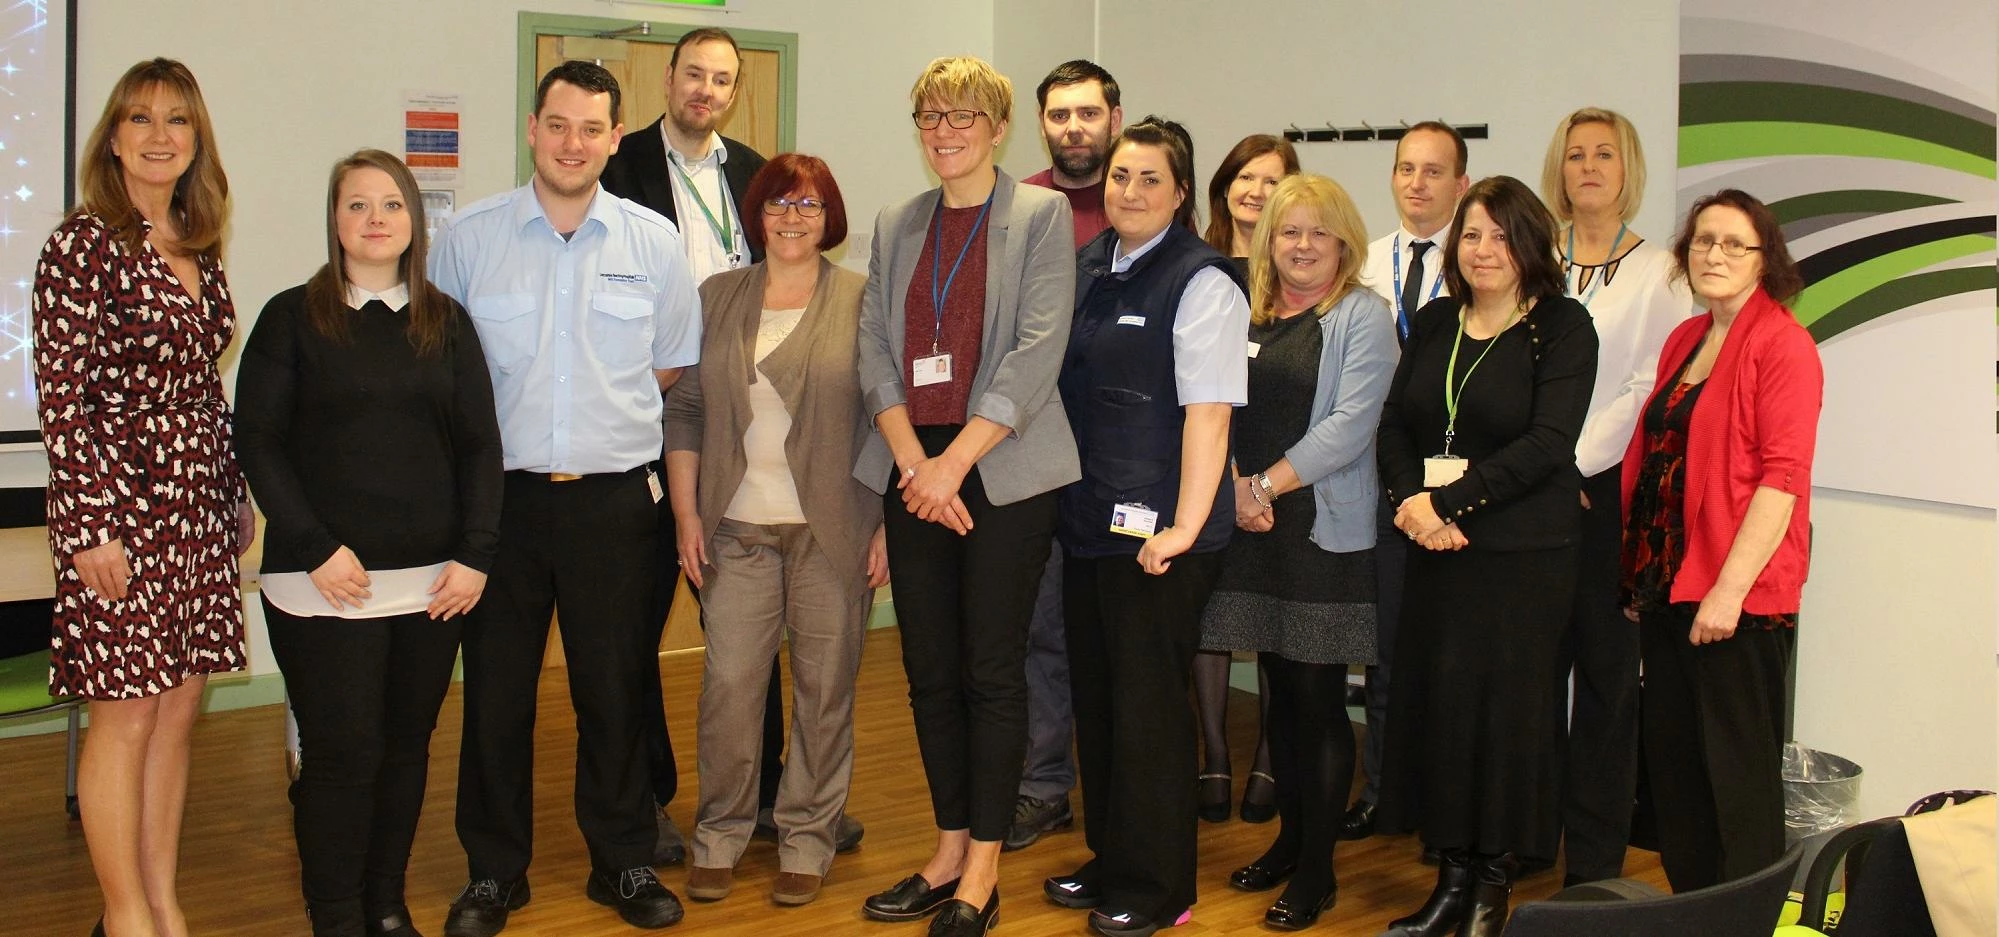 Staff and students from Preston's College, Lancashire Teaching Hospitals NHS Foundation Trust and Pr